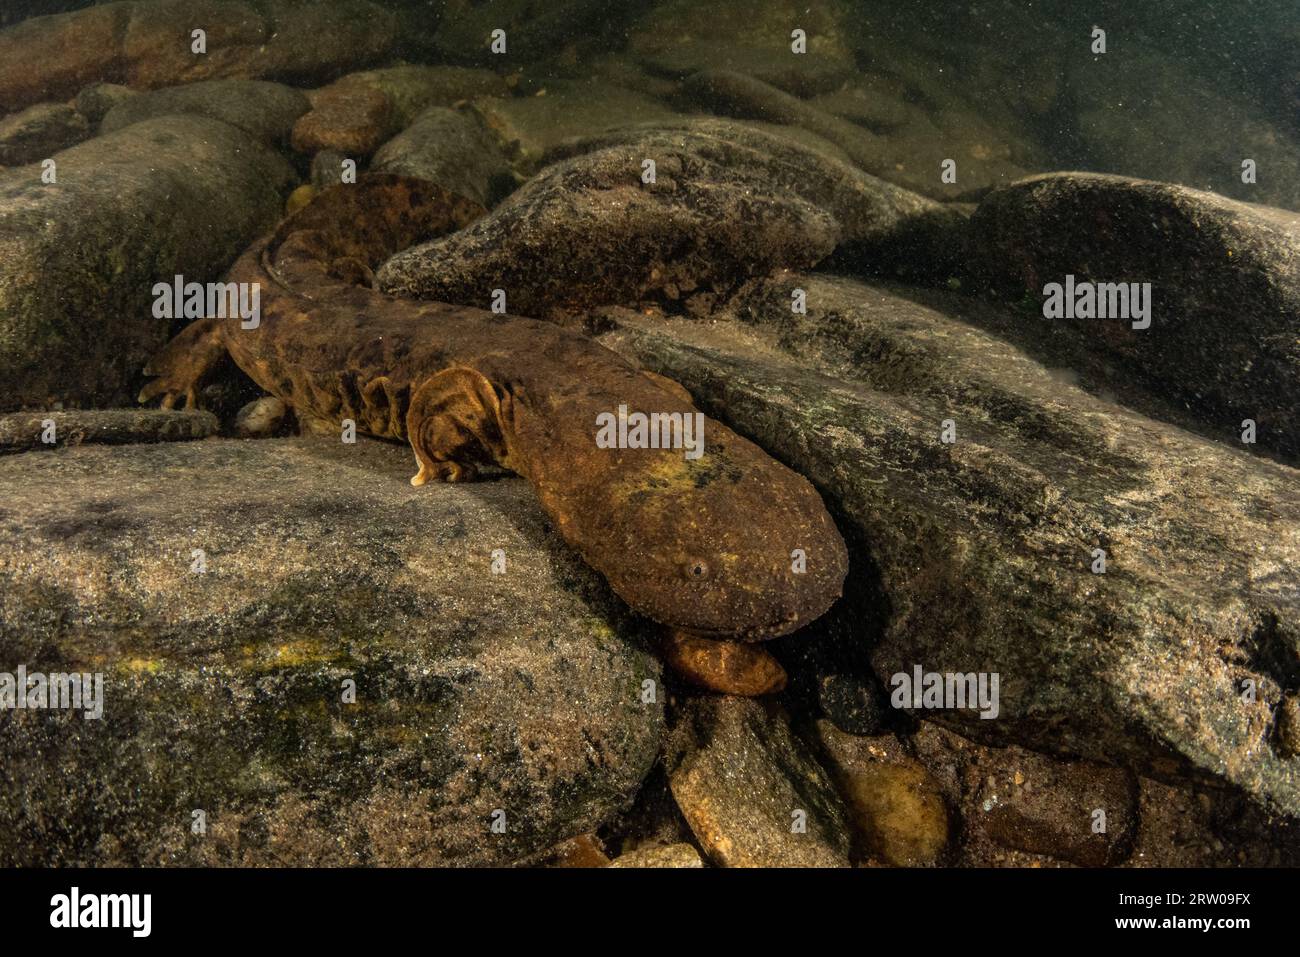 An aquatic hellbender salamander (Cryptobranchus alleganiensis) the largest amphibian in North America, is an species found in pristine freshwater. Stock Photo